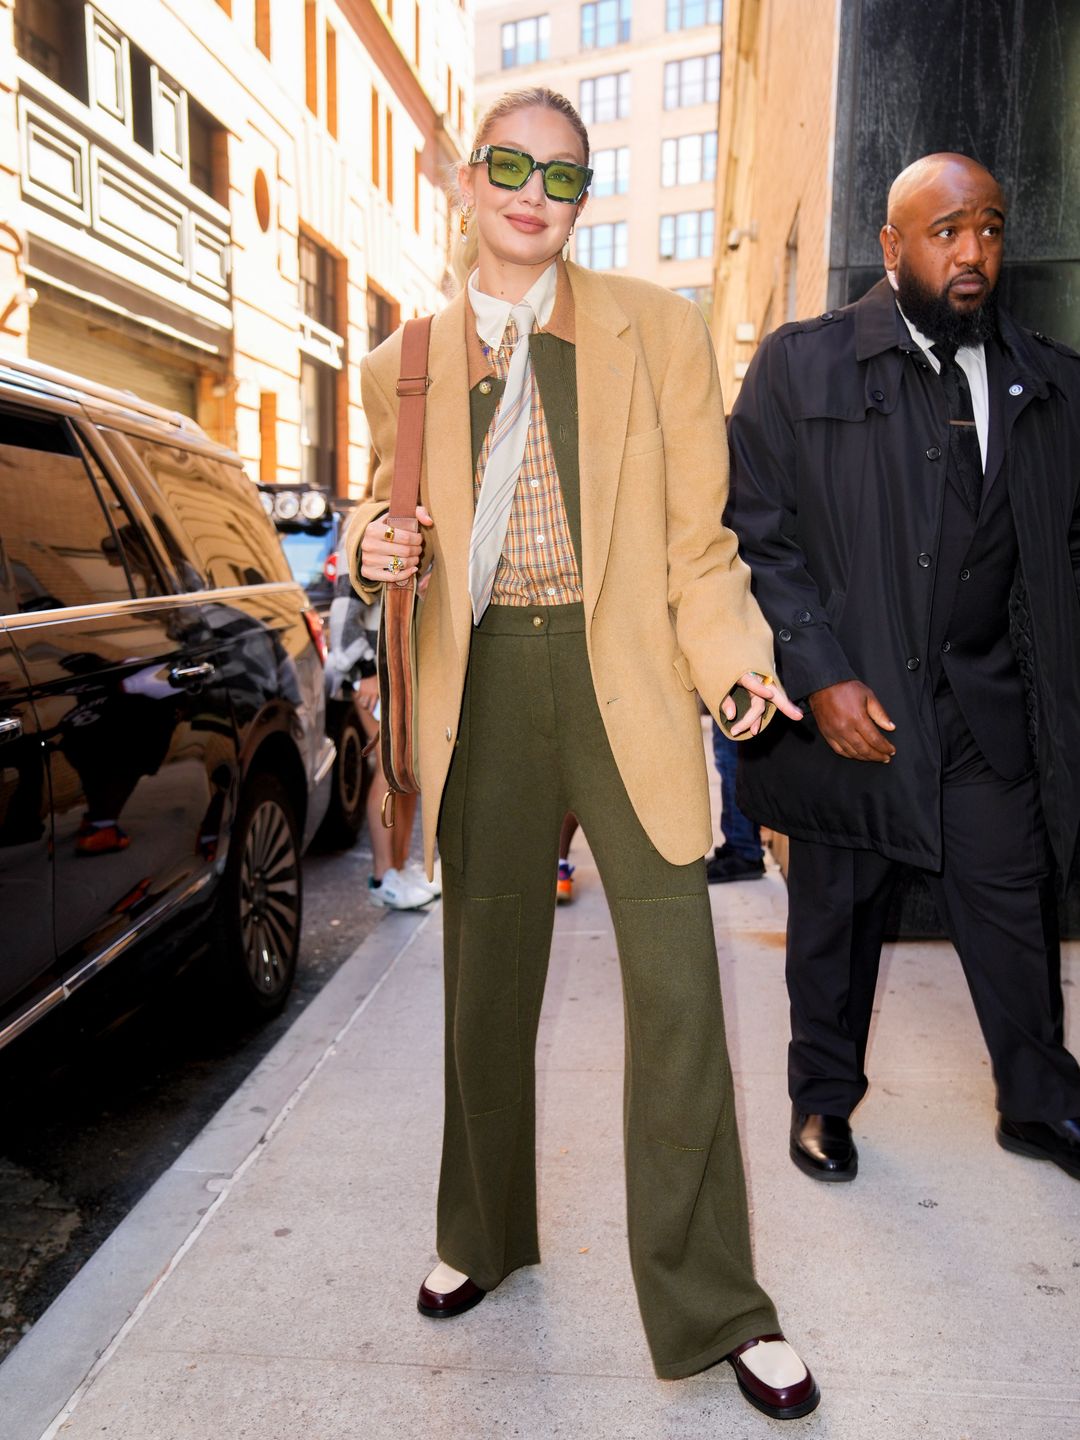 Gigi Hadid out and about on October 14, 2022 in New York City wearing a green suit and camel toned blazer 